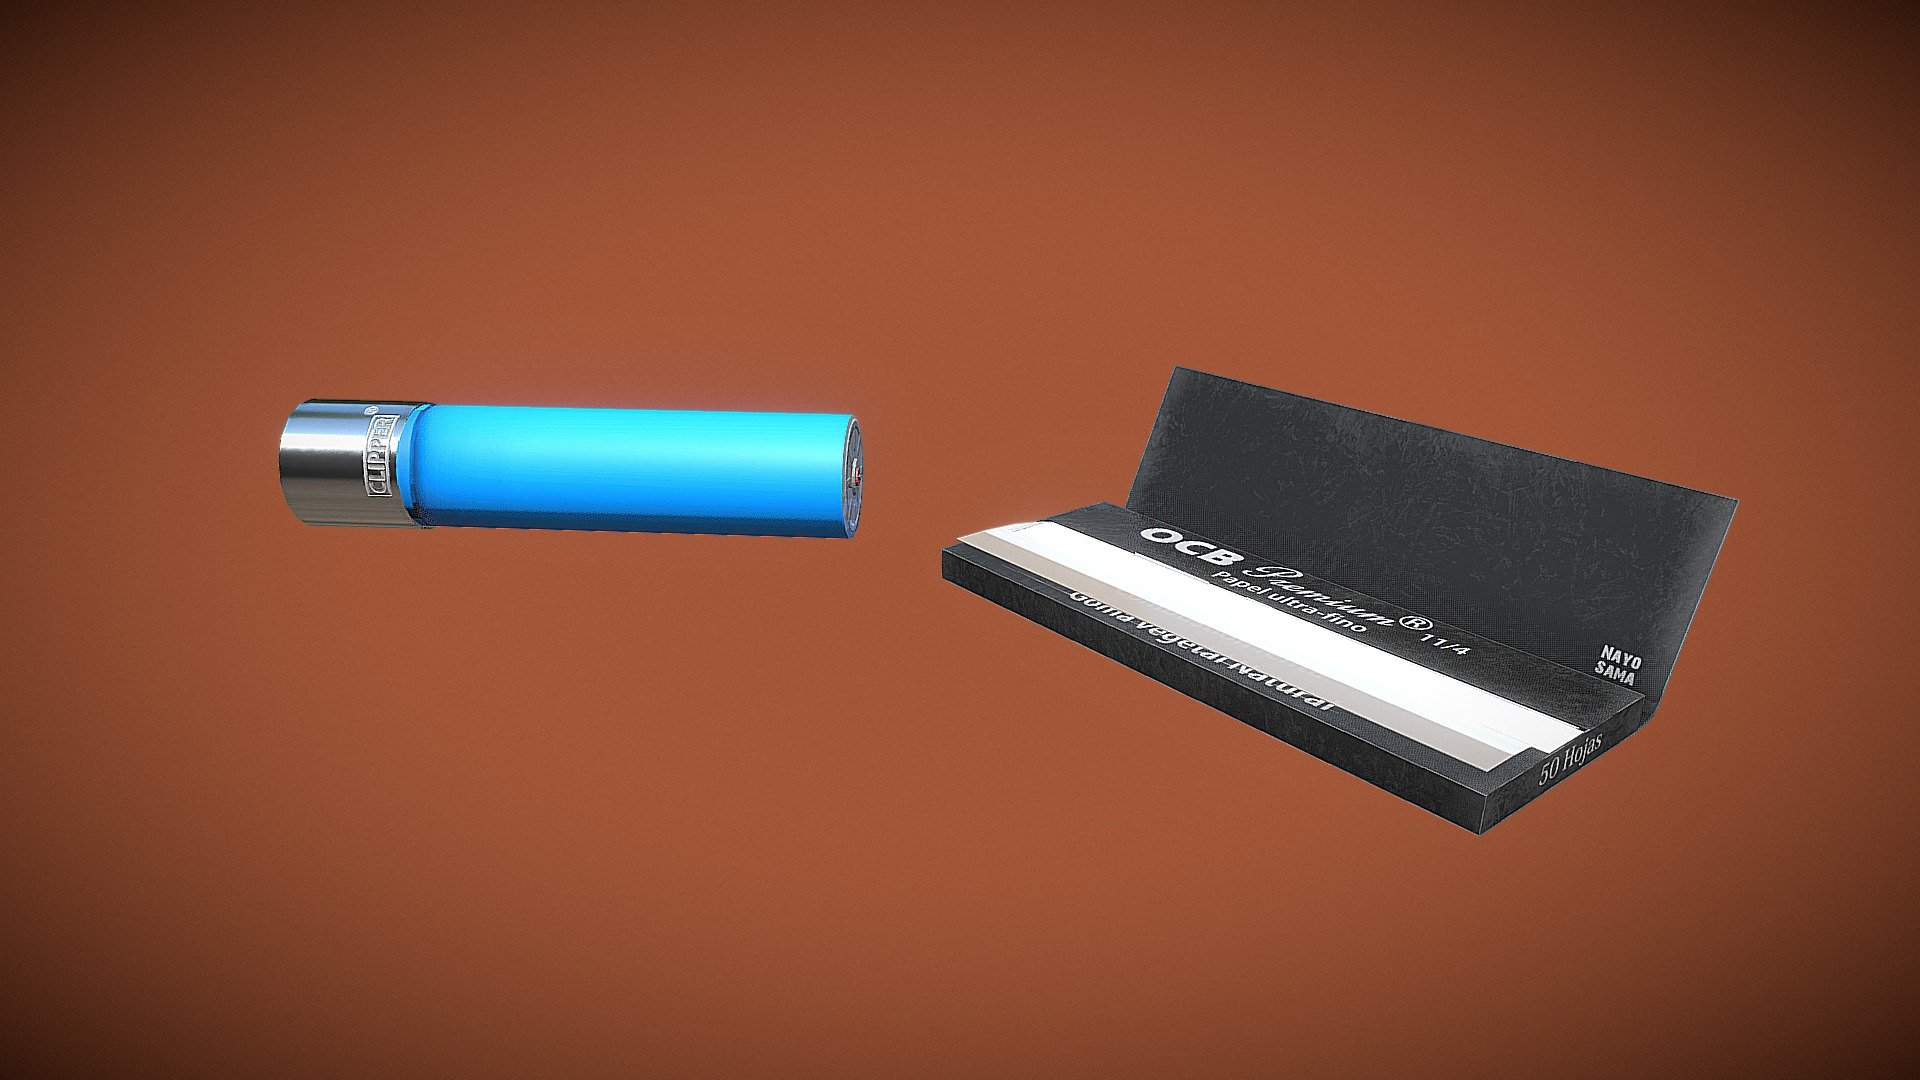 Lighter and Rolling Paper.
Made in 3dMax Painted in Substance Painter 3d model